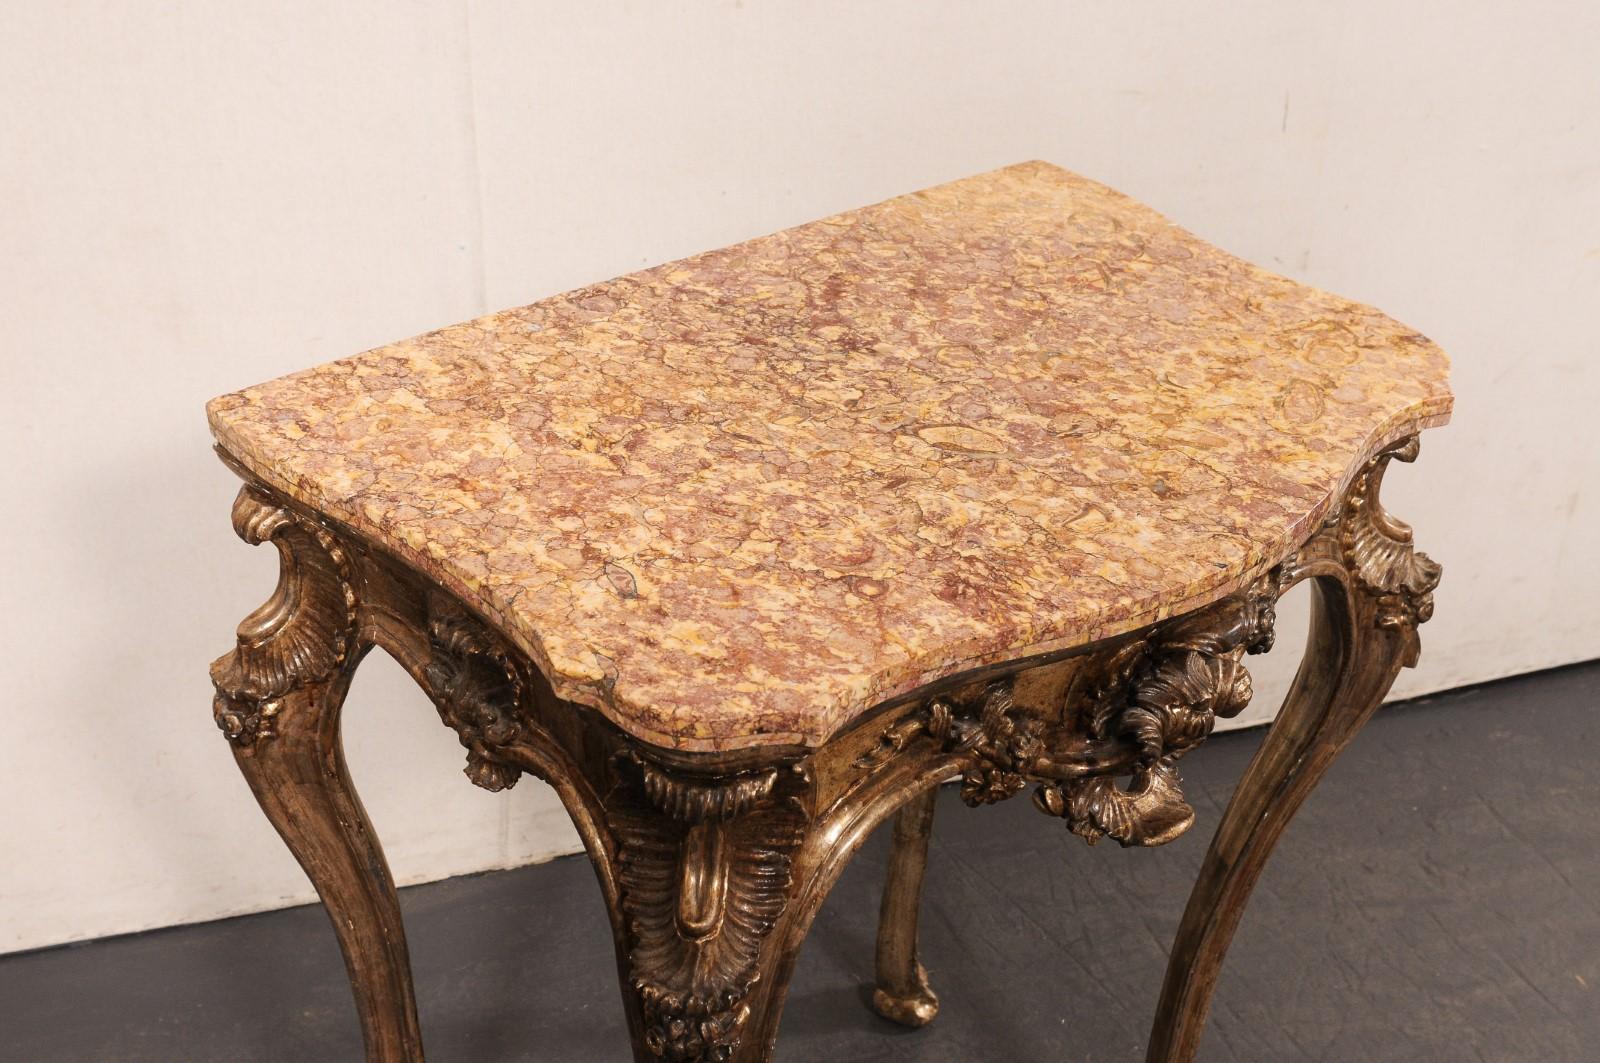 18th Century and Earlier Italian Period Rococo Ornate Accent Table w/its Original Finish & Marble Top For Sale